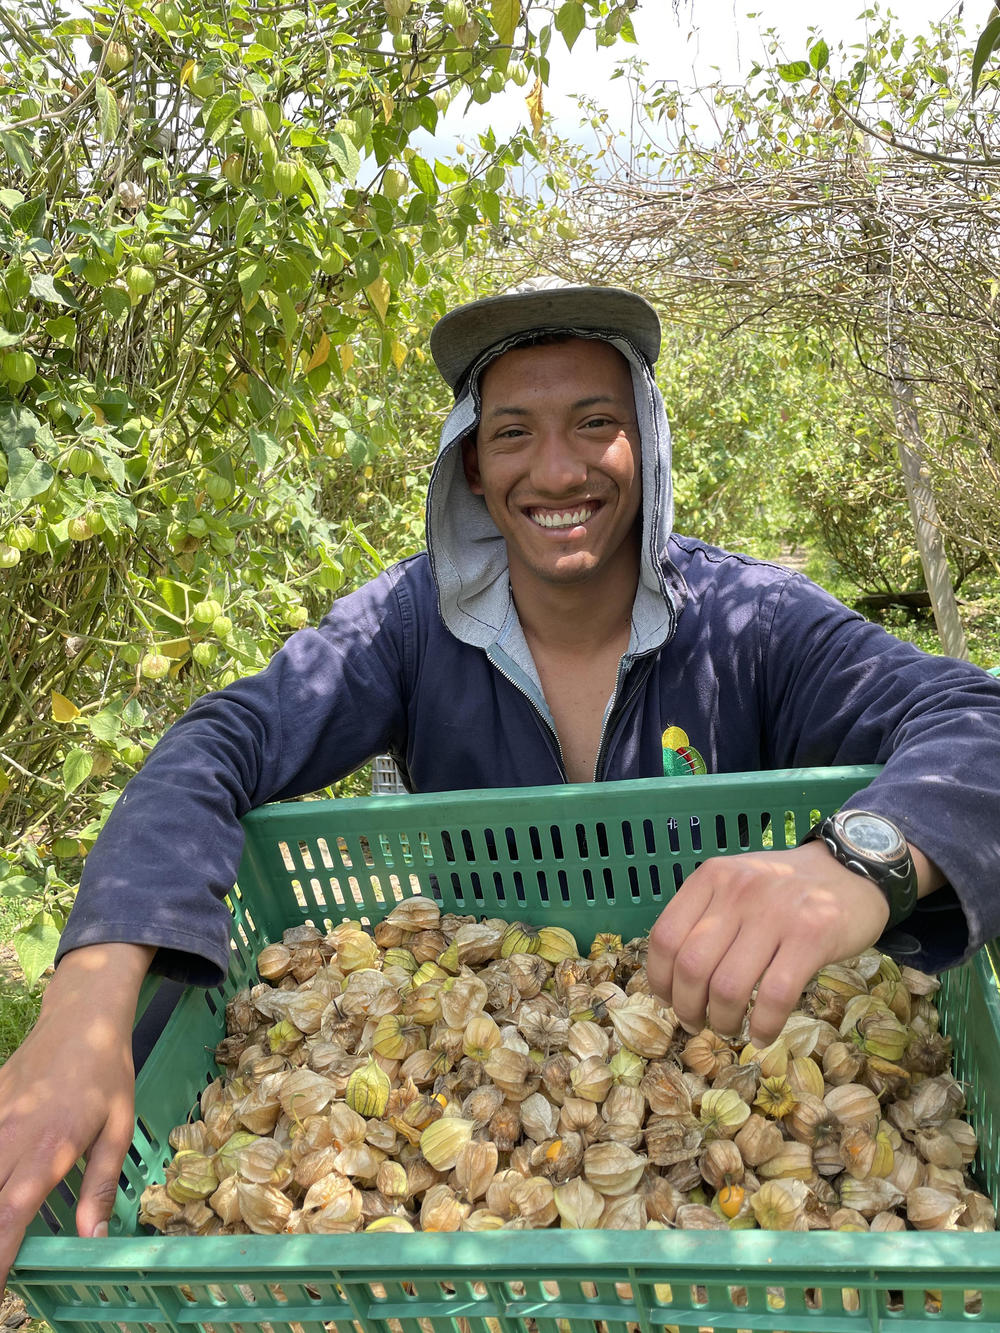 Isaias Bello, a 26-year-old Venezuelan migrant, earns a living picking gooseberries on a farm outside Bogotá. With the new program for undocumented Venezuelan migrants, 